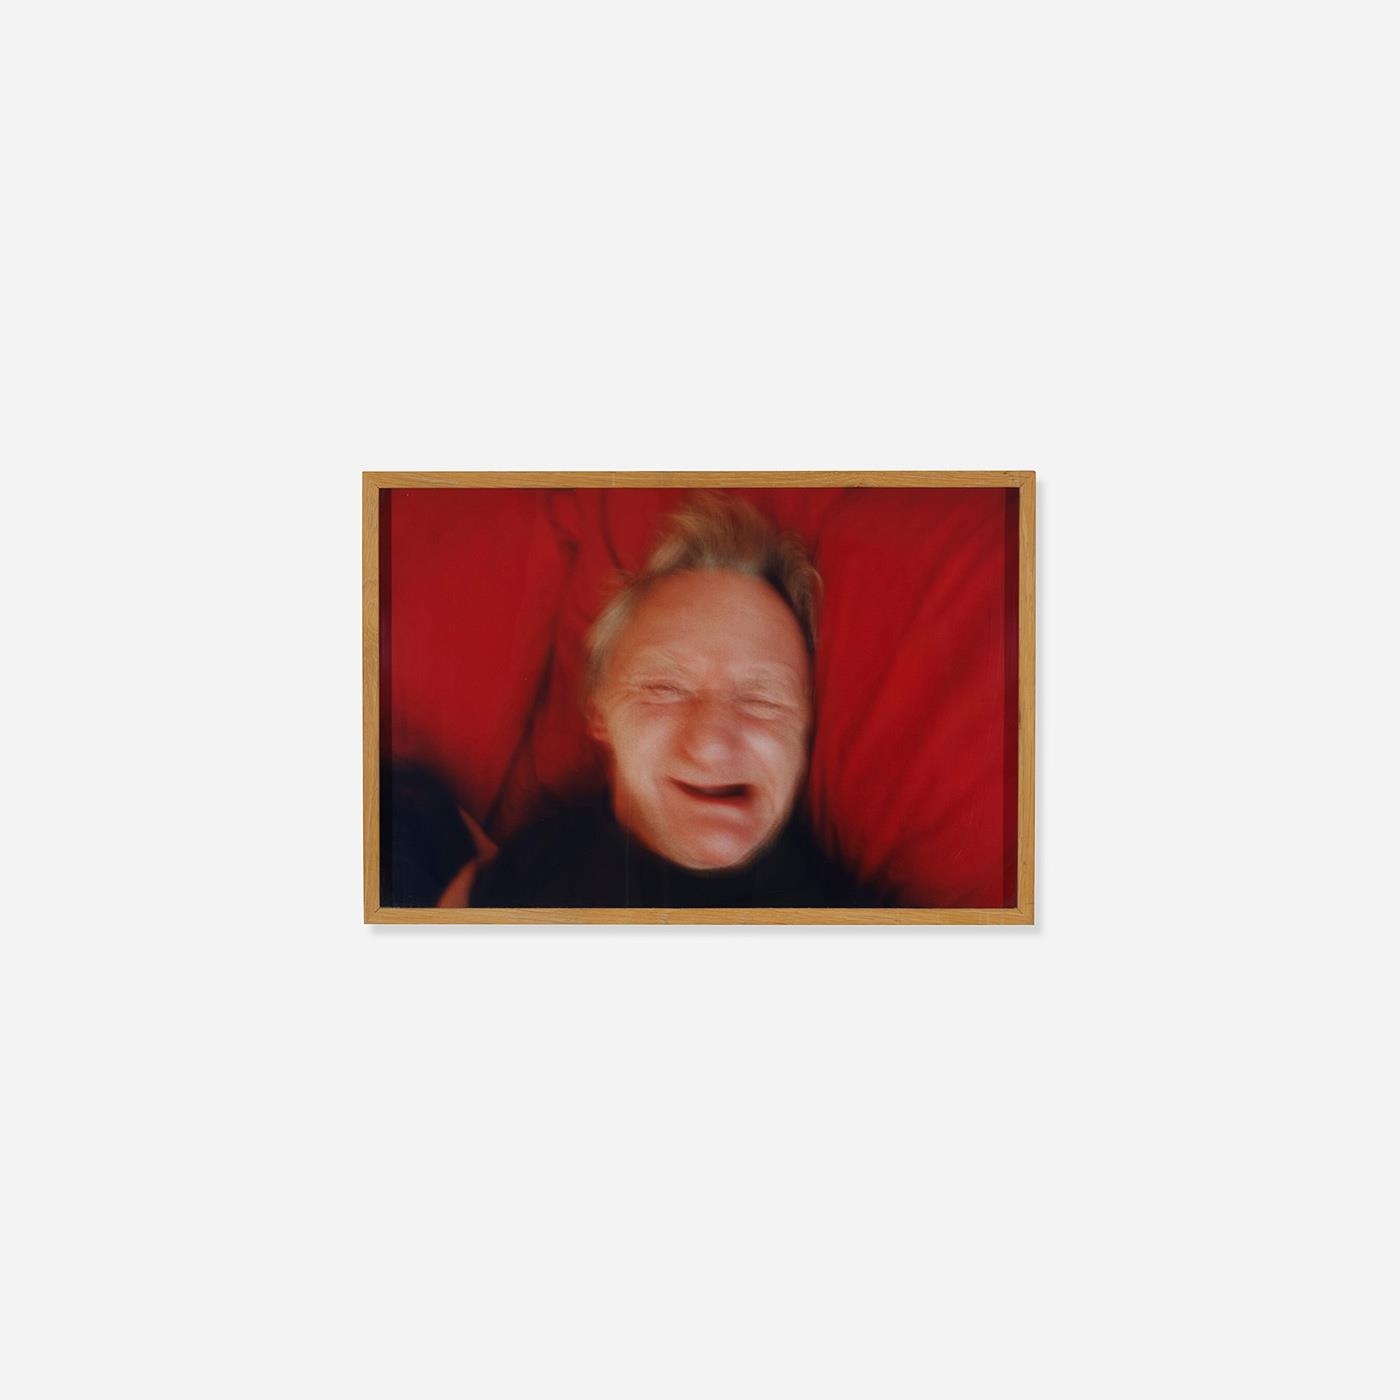 Untitled (Ray's a laugh 37) by Richard Billingham, 1994/1997